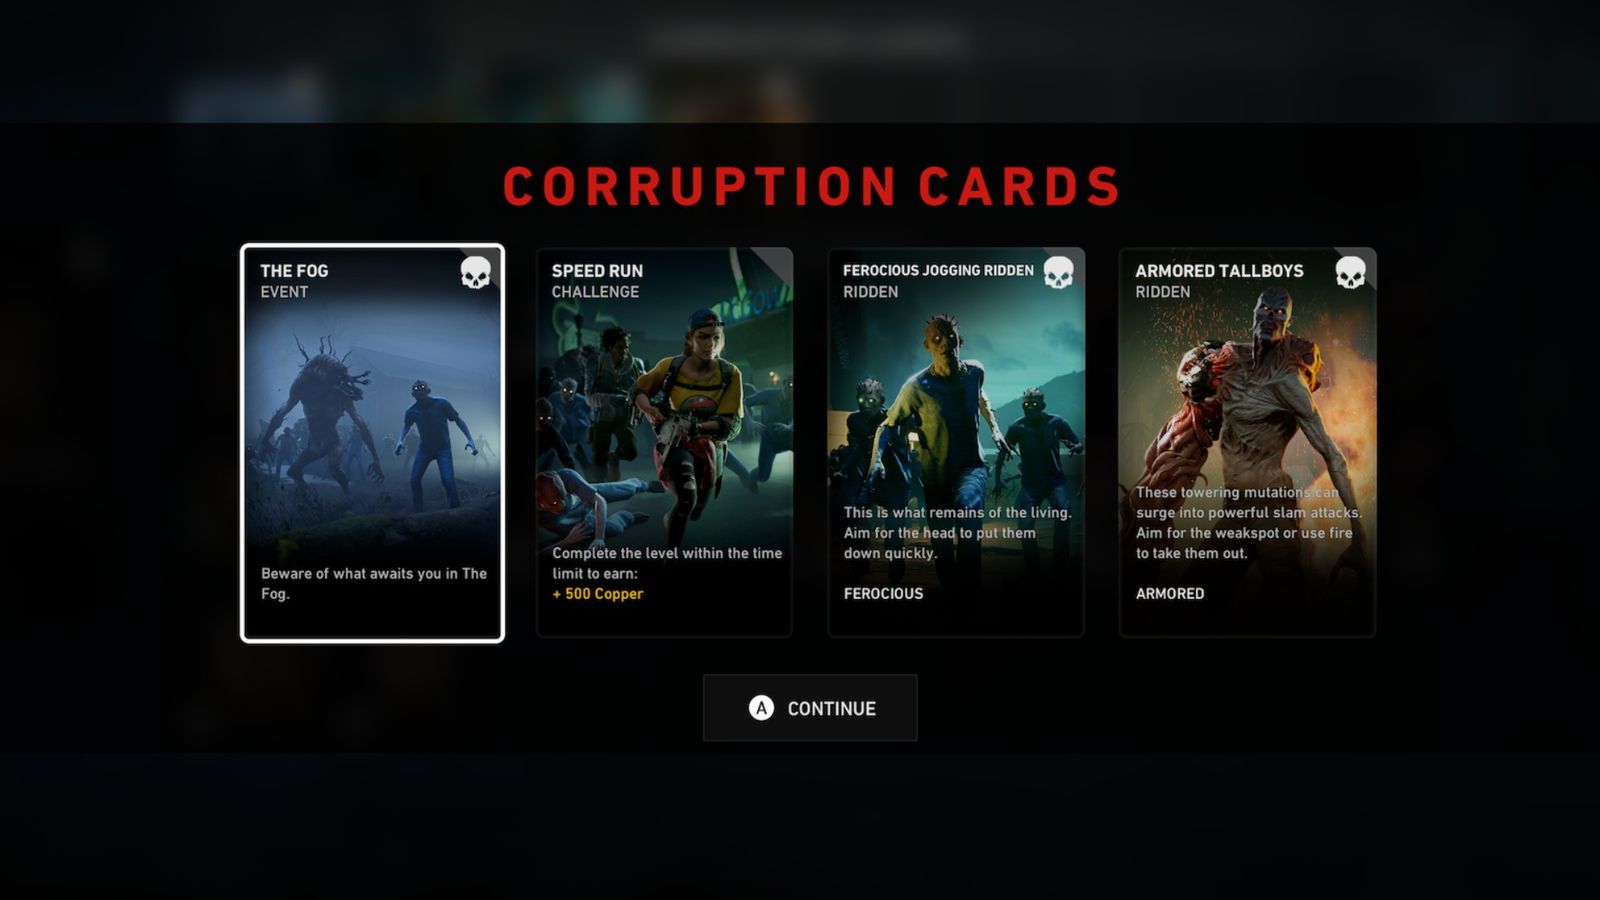 Back 4 Blood Corruption cards laid out by game director
